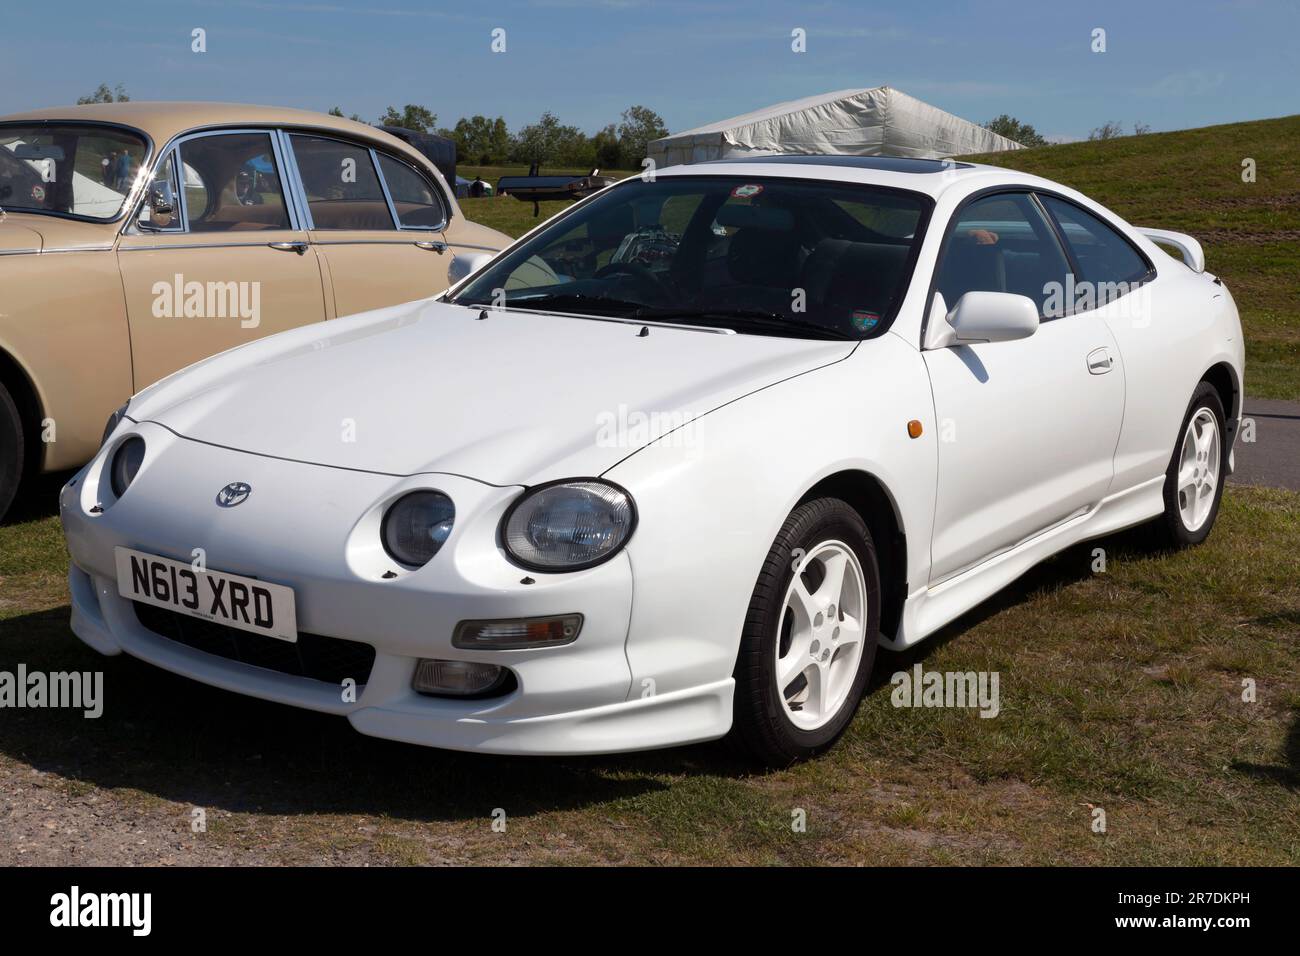 Three-quarter front view of a White, 1996, Toyota Celica on display at the 2023 Deal Classic Car Show Stock Photo